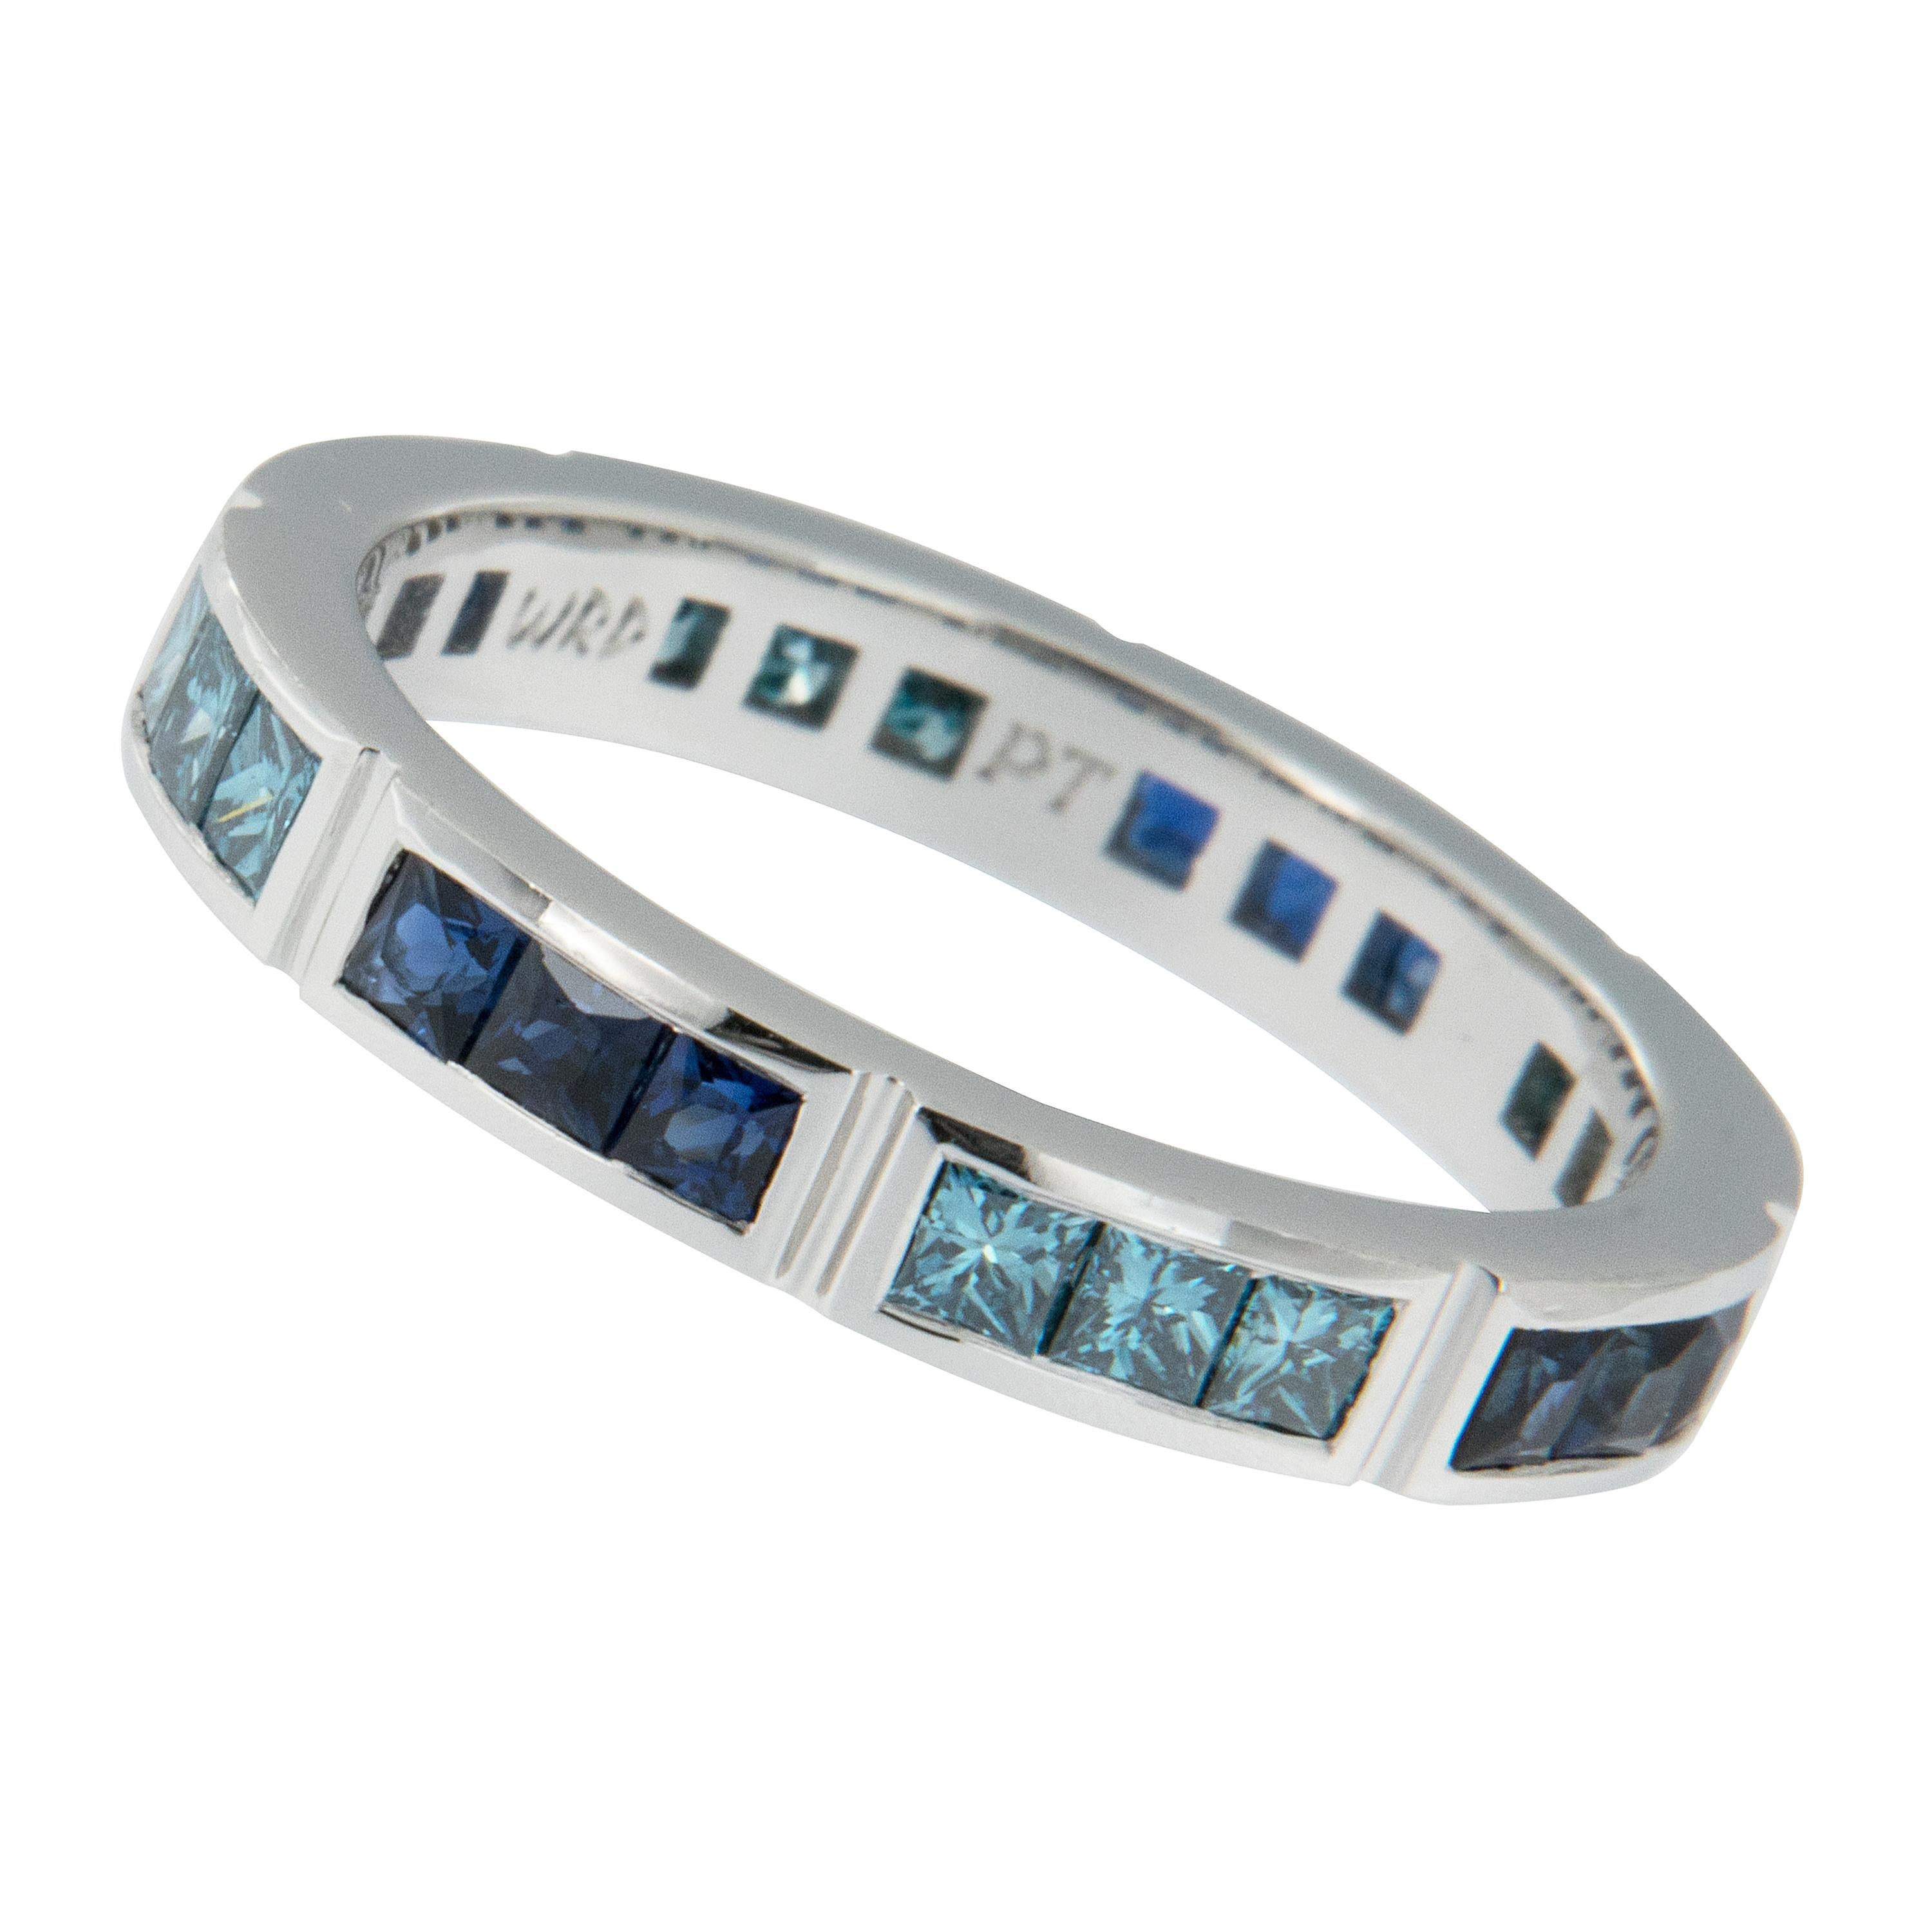 Soothing blue hues set this segmented eternity ring apart from all others! Expertly hand fabricated eternity band by William Rosenberg made from noble platinum with 0.76 Cttw blue sapphires & 0.67 Cttw treated blue diamonds. This ring was made in a